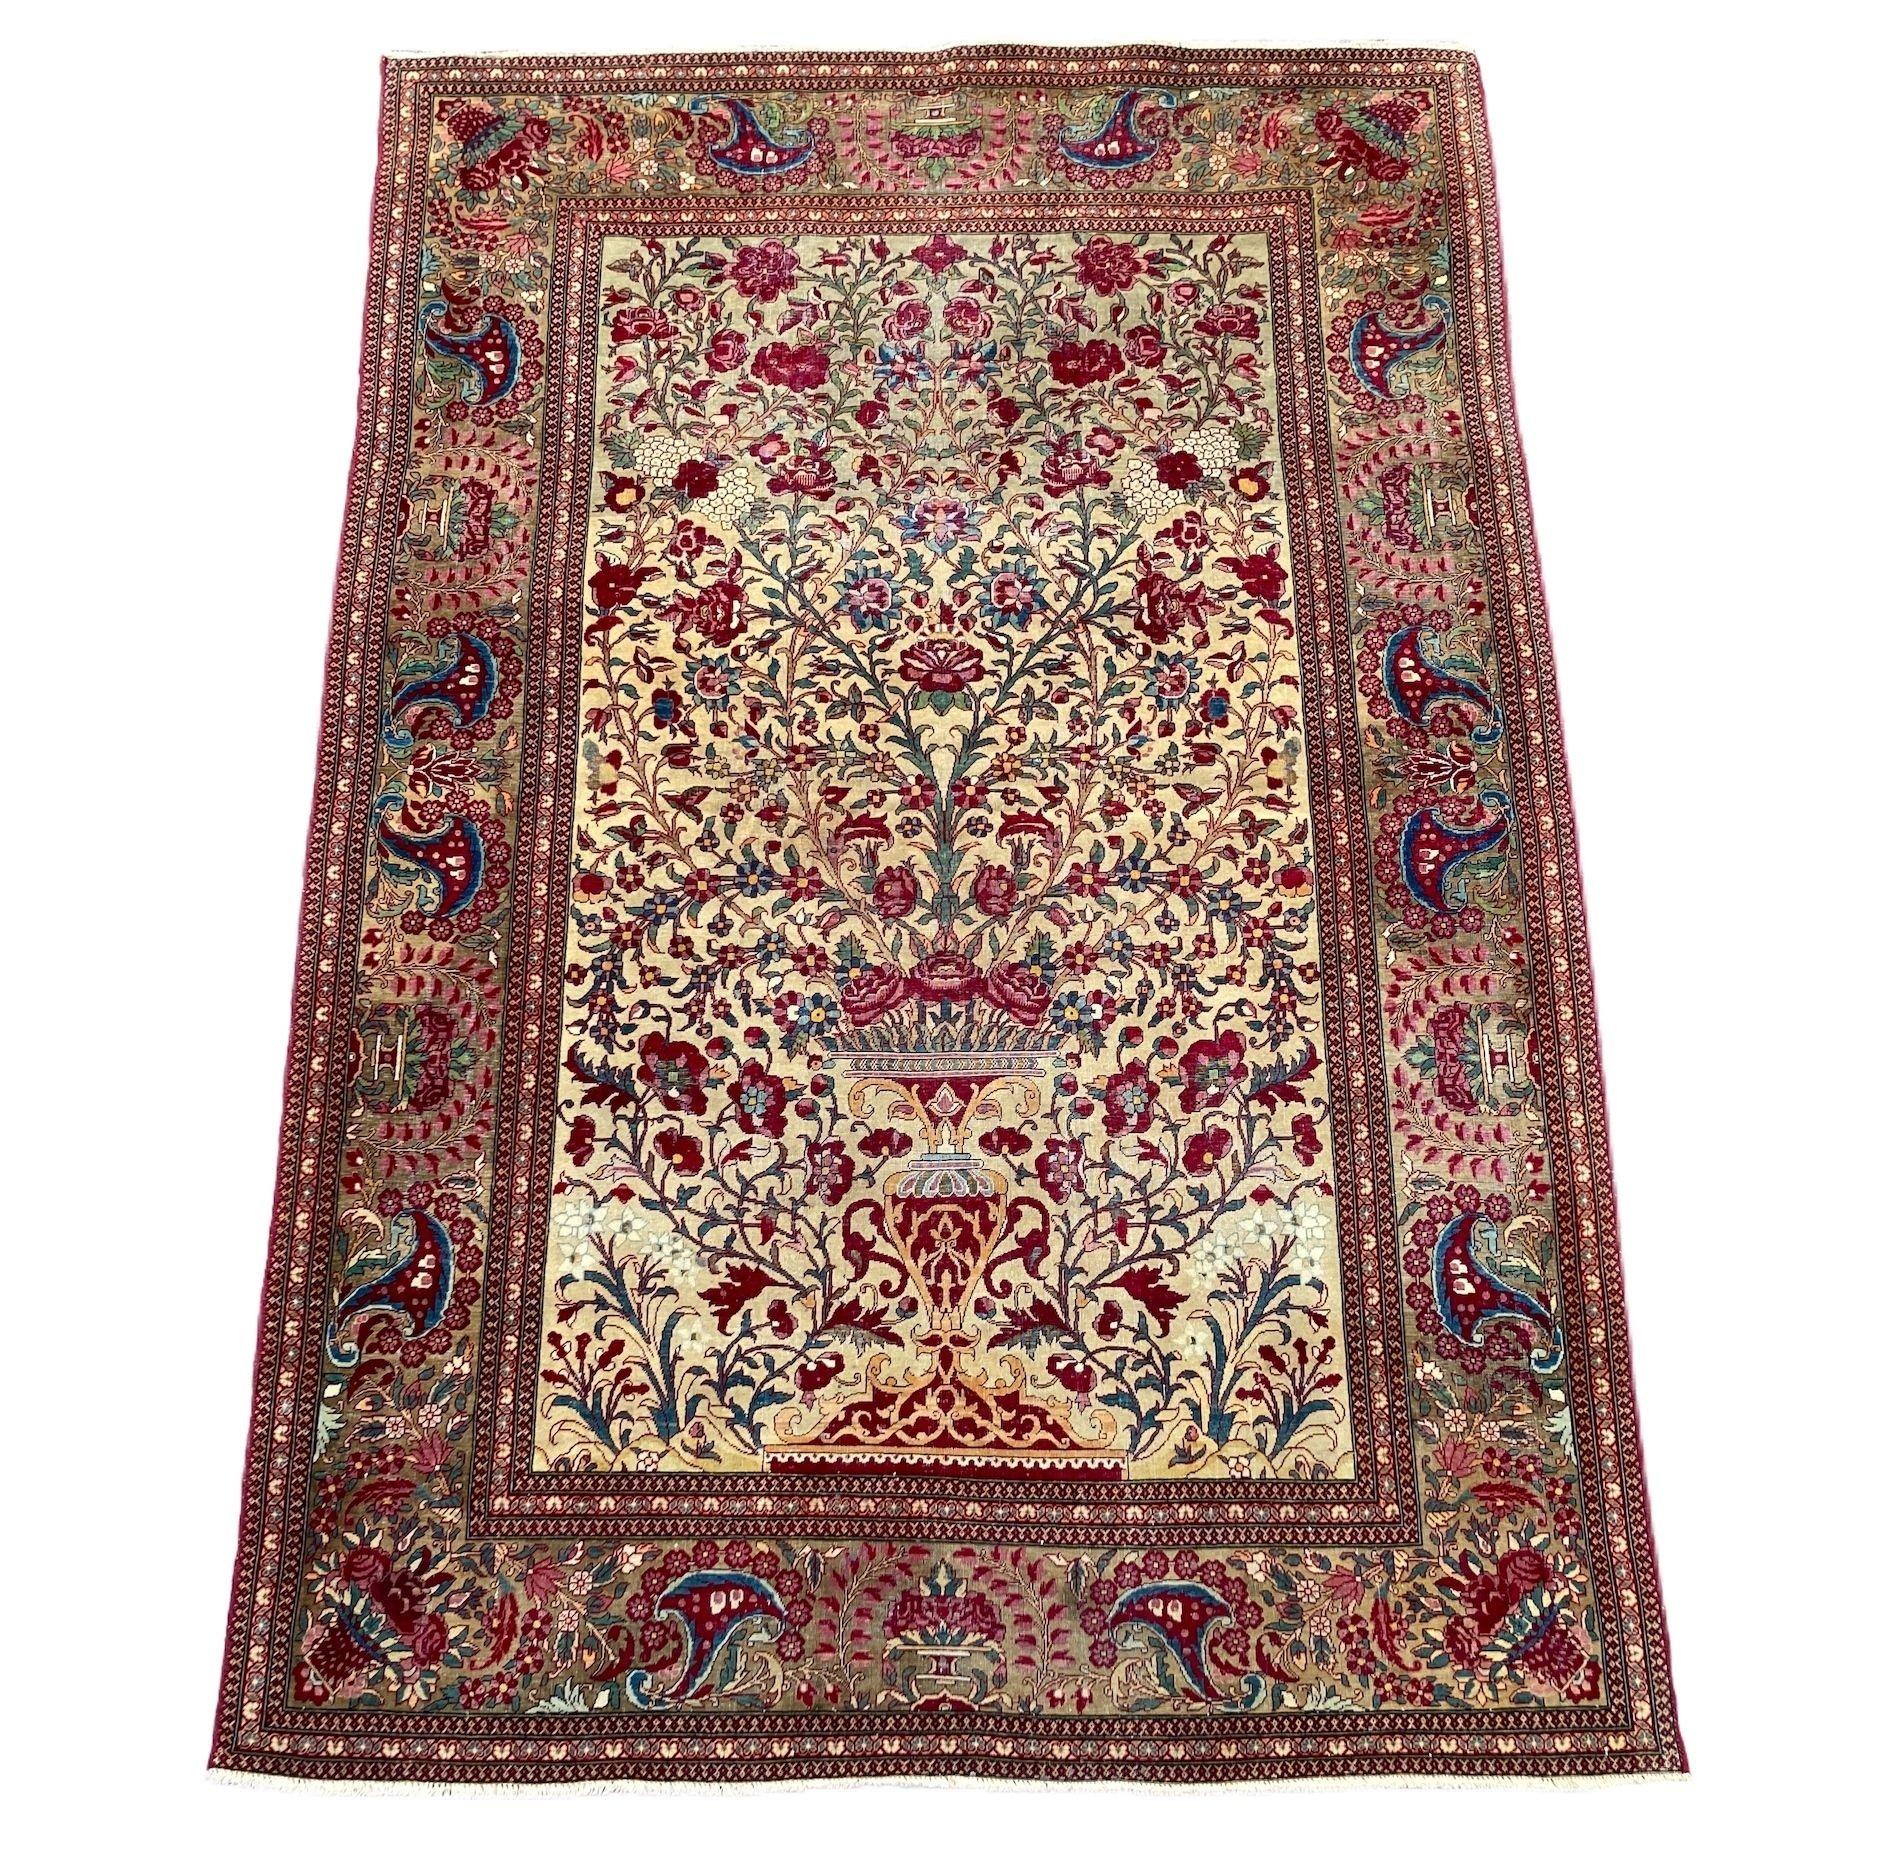 A stunning antique Isfahan rug, hand woven circa 1900 with an elegant vase design on an ivory field and camel border. Finely woven with lovely wool quality and great secondary colours of terracotta, greens and blues.
Size: 2.04m x 1.38m (6ft 8in x